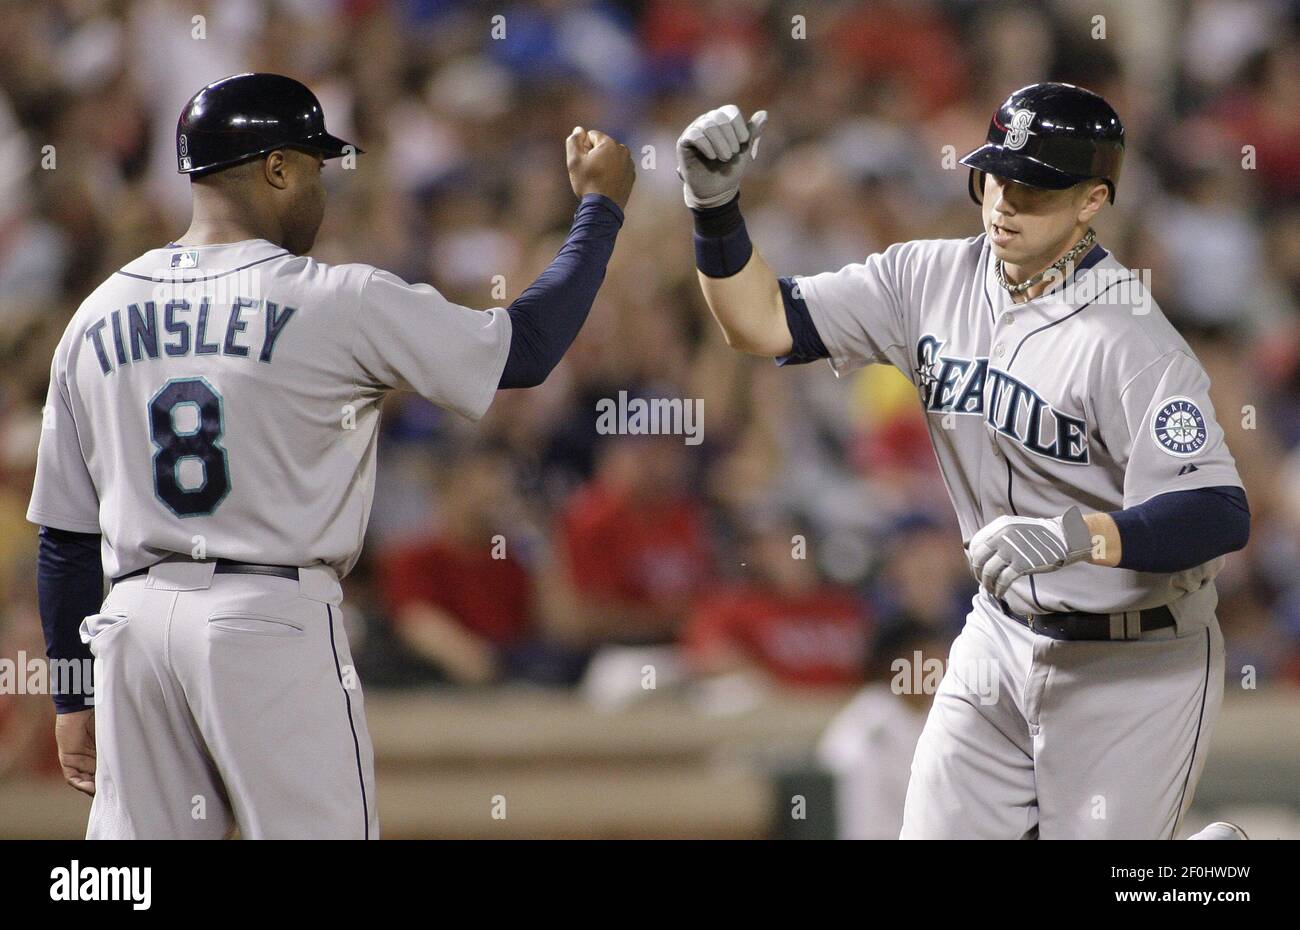 Seattle Mariners' Justin Smoak, right, high-fives third base coach Lee  Tinsley after his a two-run home run in the fourth inning against the Texas  Rangers at Rangers Ballpark in Arlington, Texas, on